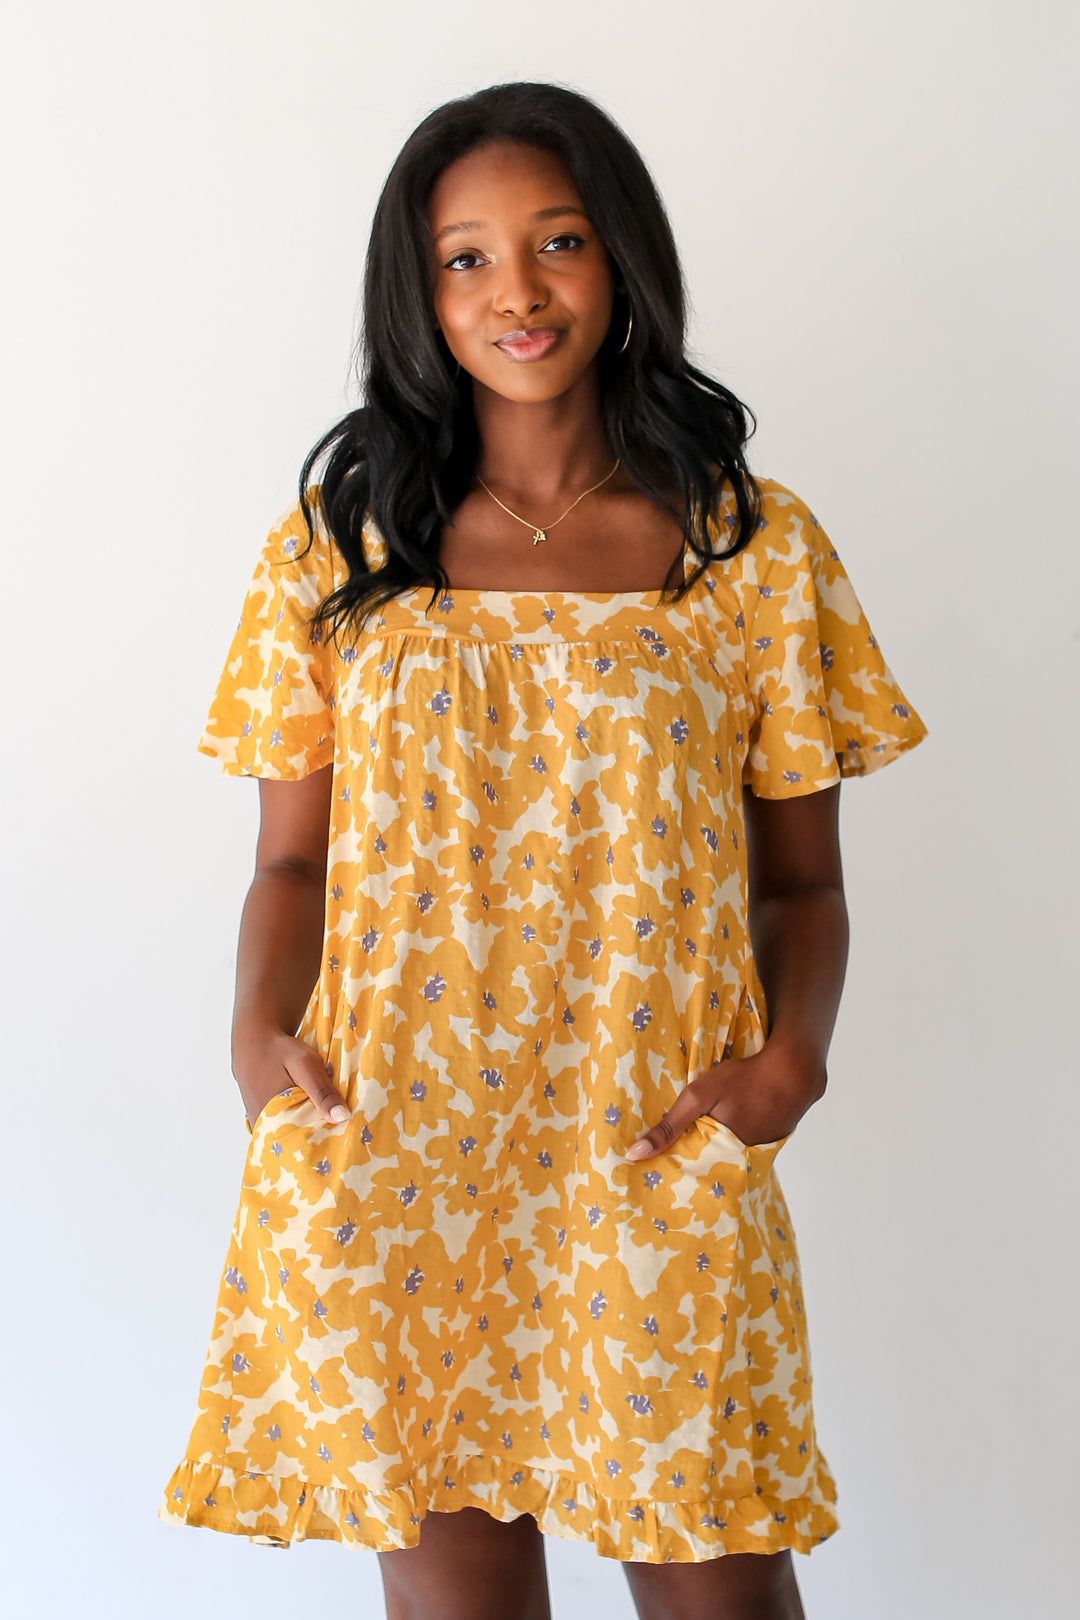 Hudson Gray | Dress Up | Mustard Floral Mini Dress | *NEW* With Tags | Size M